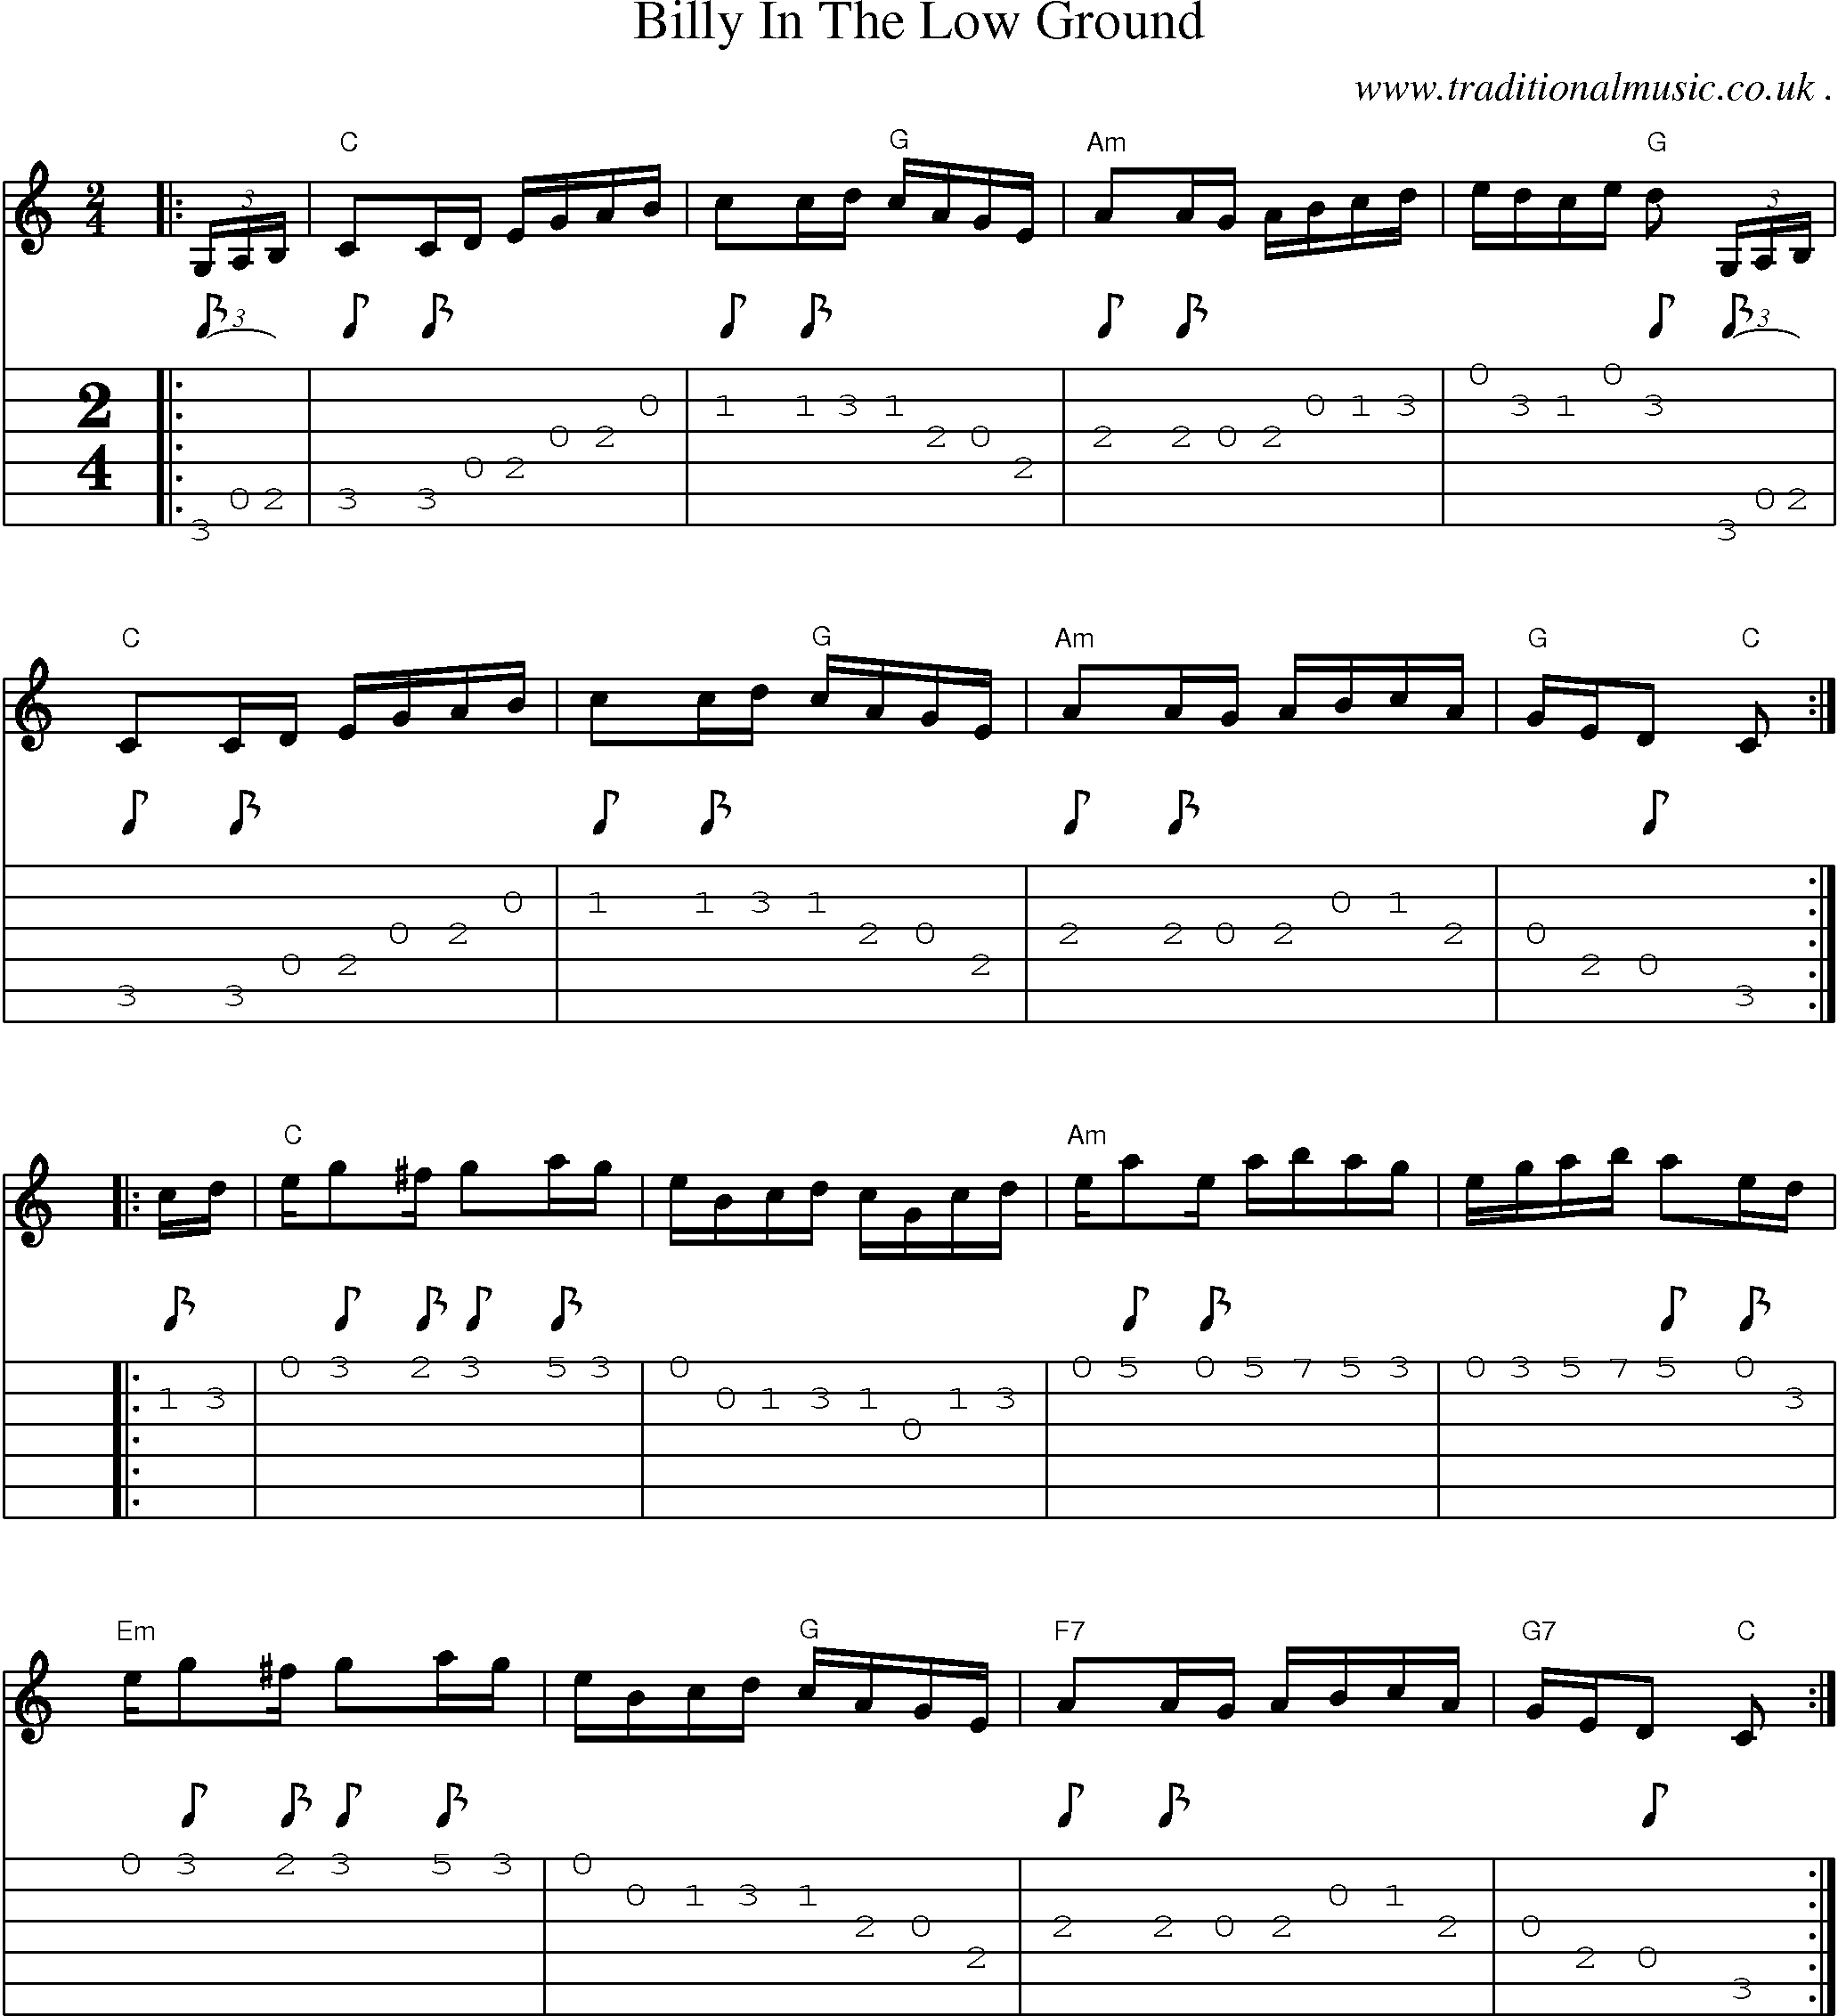 Music Score and Guitar Tabs for Billy In The Low Ground